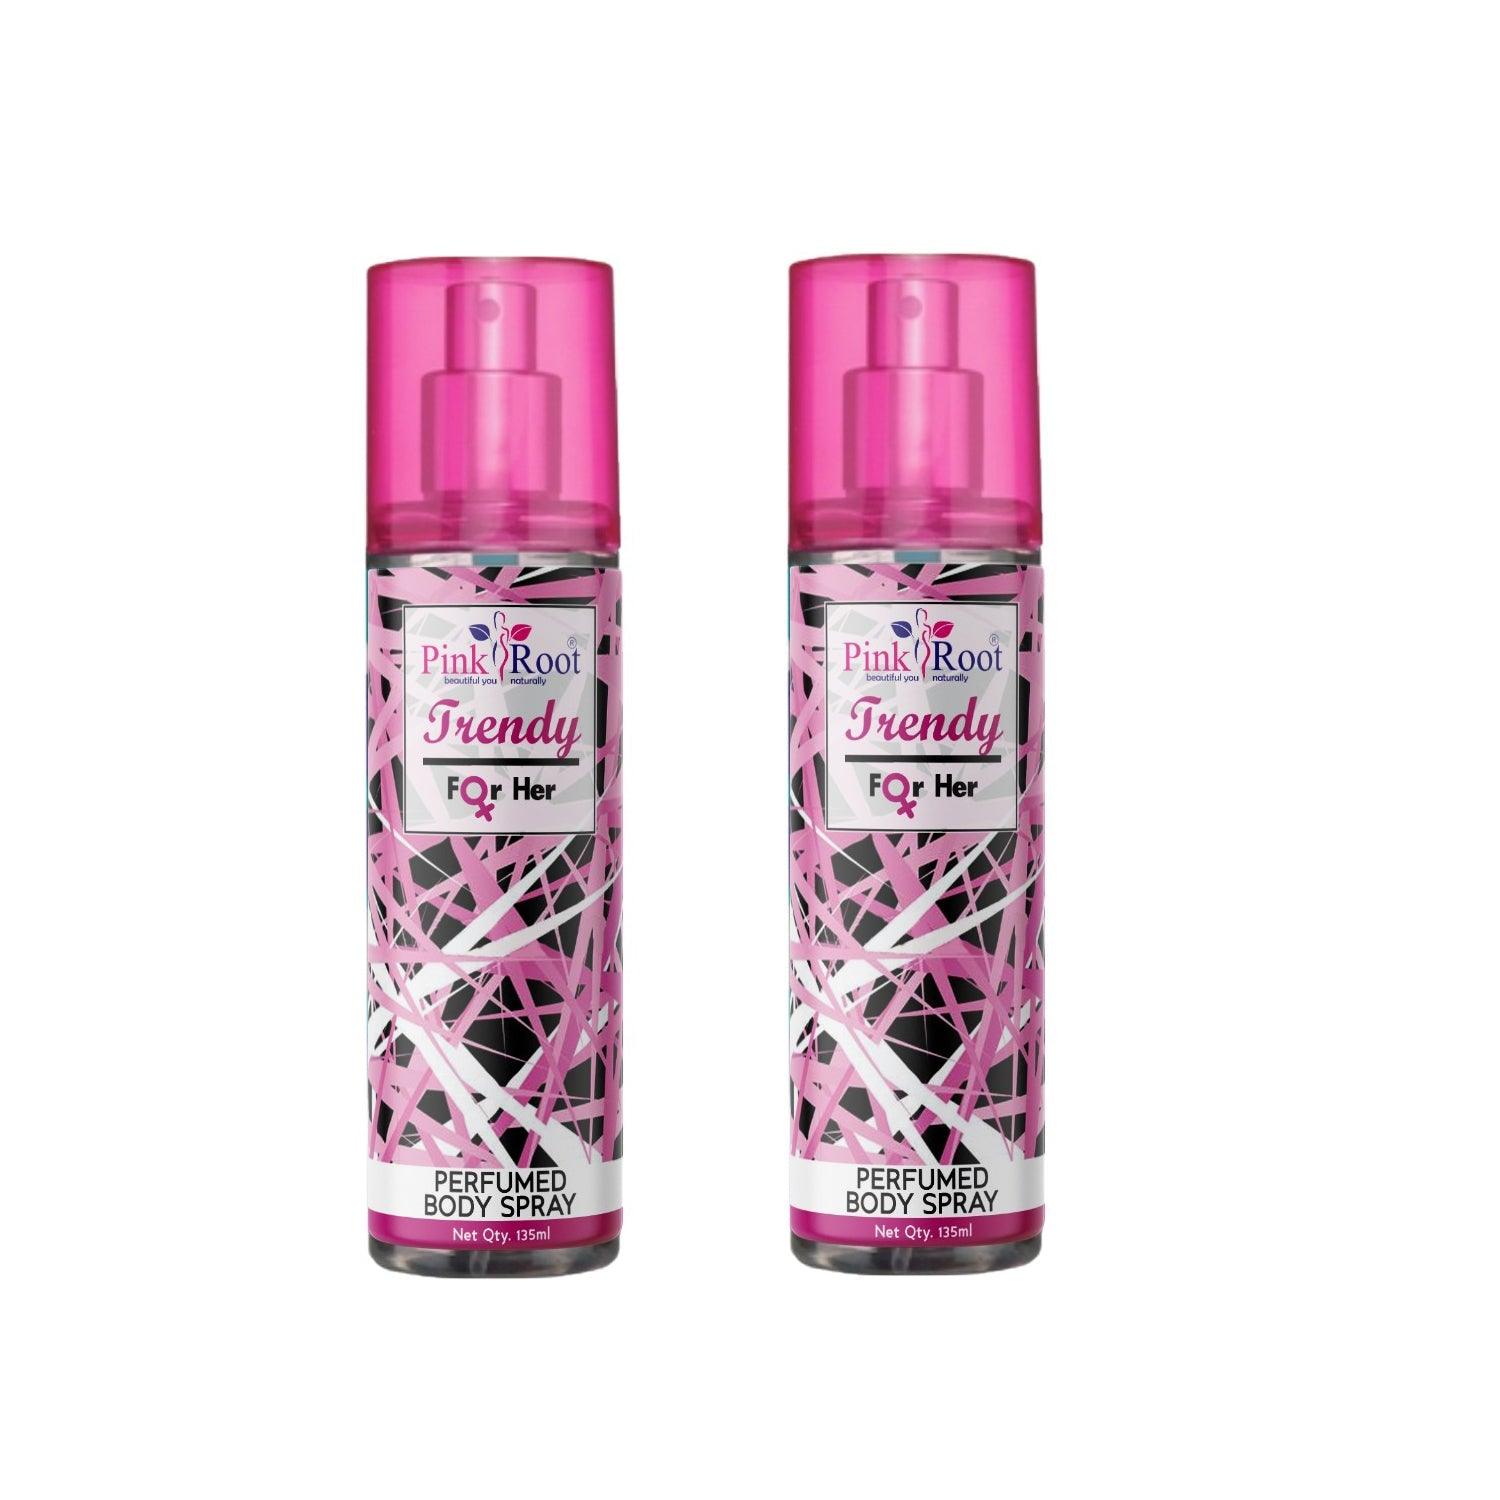 Trendy Perfumed Body Spray for Women, Pack of 2 - Pink Root